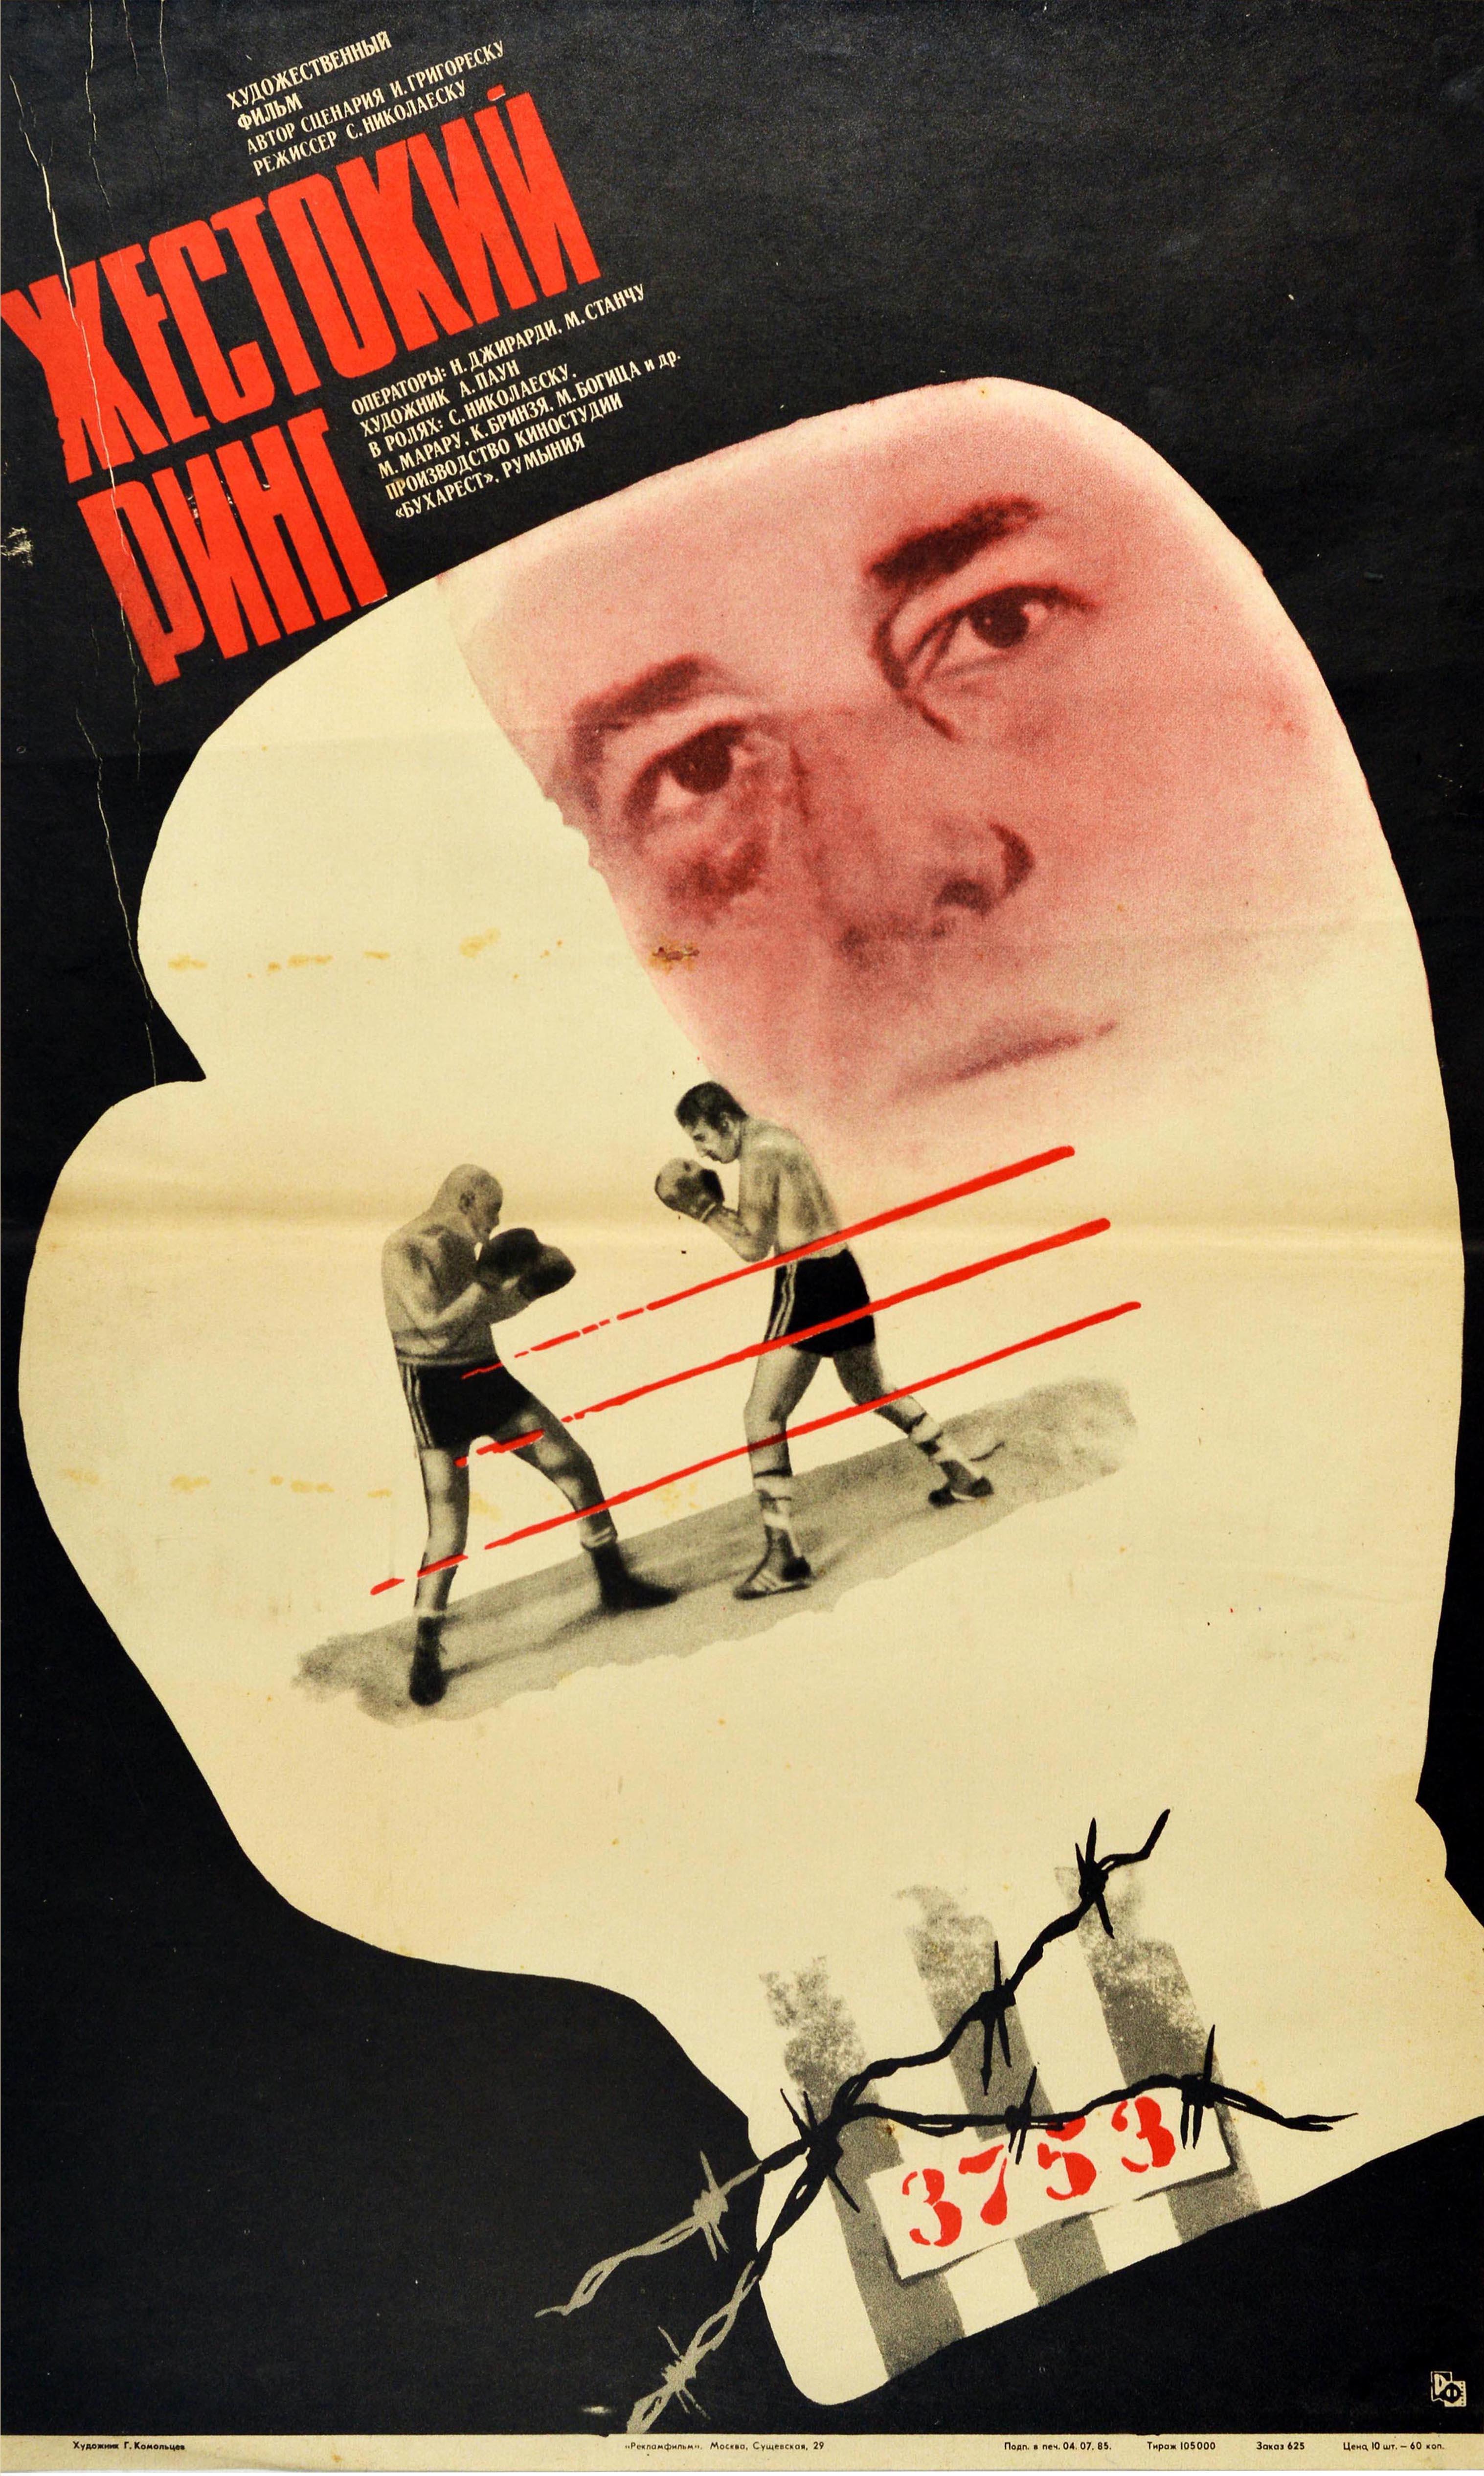 Original vintage Soviet movie poster for the Russian release of the Romanian-German film Ringul / Im Ring / The Ring / Zhestoki Ring directed by Sergiu Nicolaescu and based on the screenplay by filmmaker Ioan Grigorescu about the release of a truck